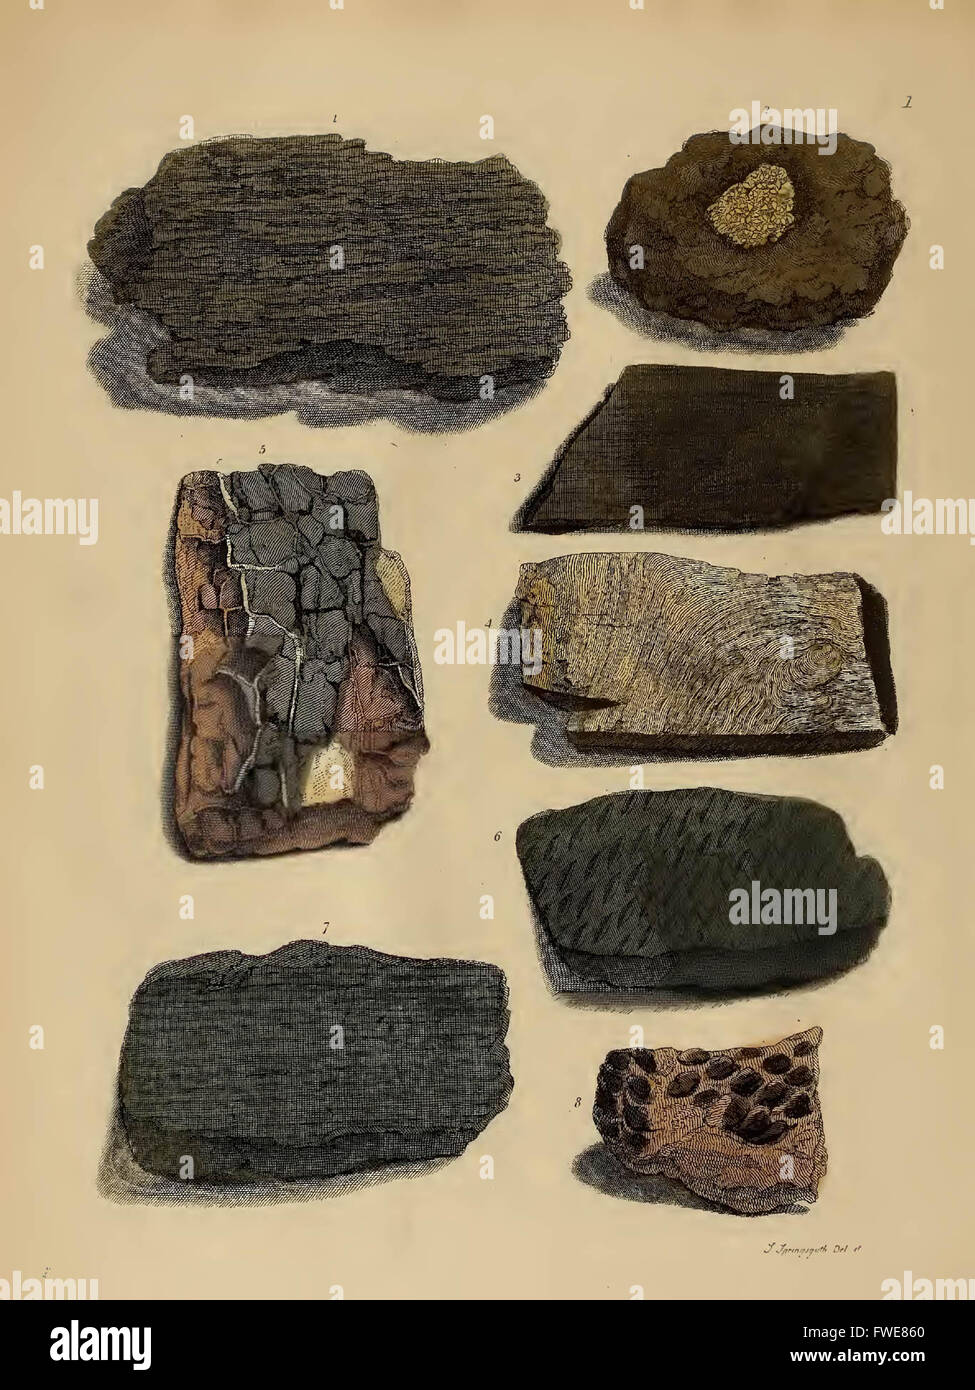 A pictorial atlas of fossil remains, consisting of coloured illustrations selected from Parkinson's "Organic remains of a former Stock Photo